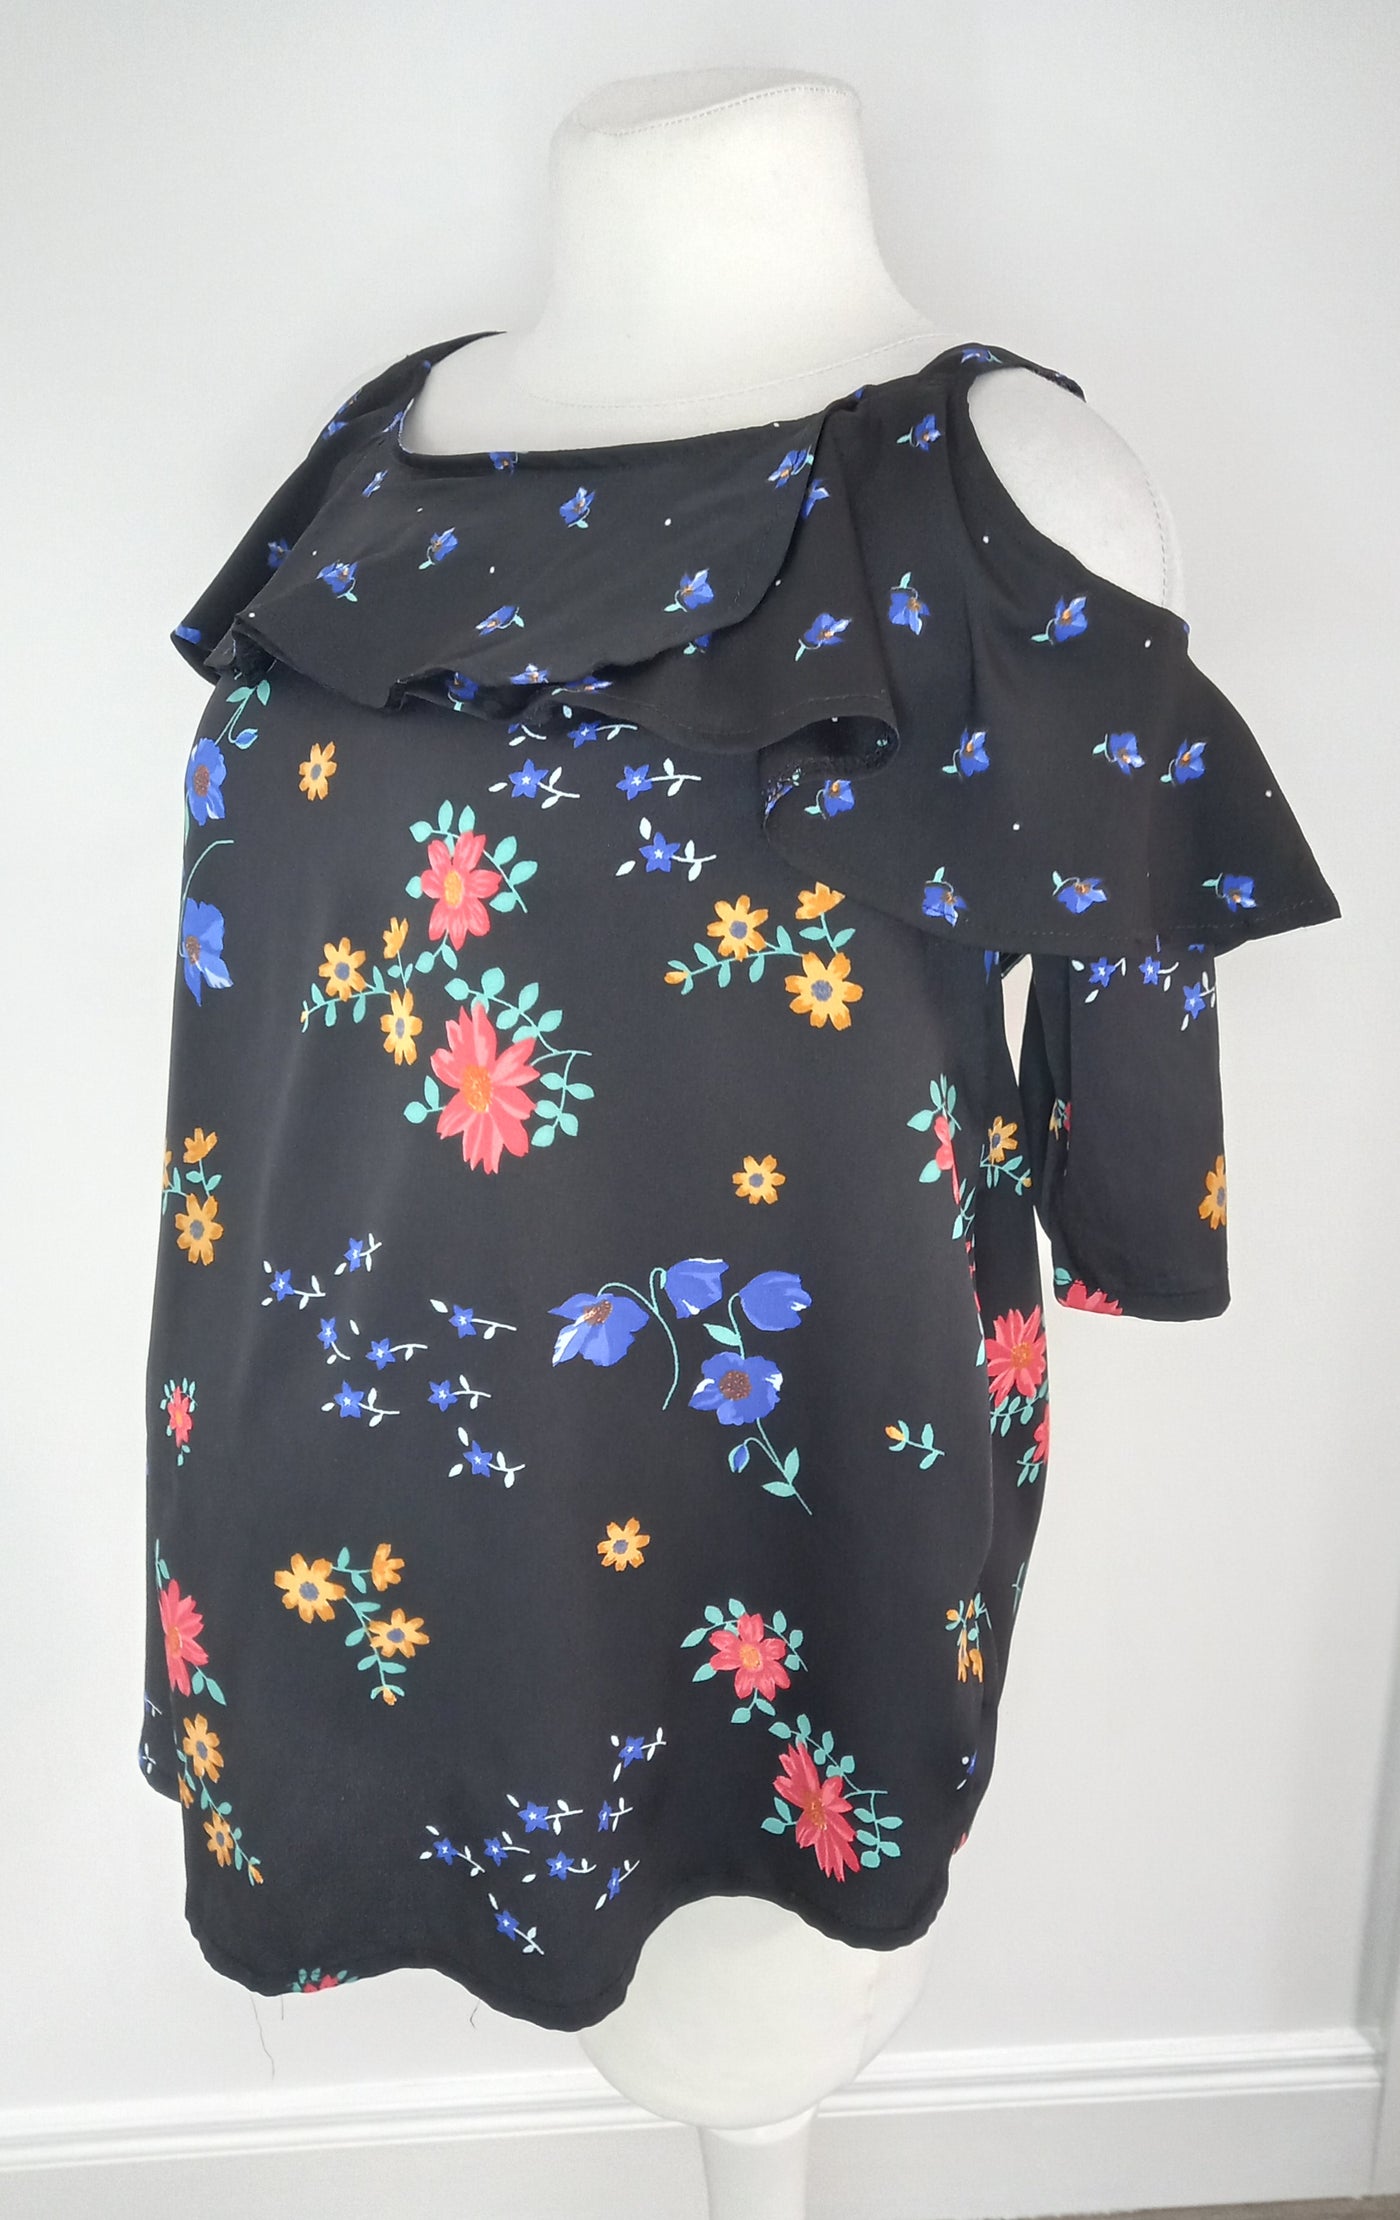 New Look Maternity Black Floral Bardot Frill Top - Size 14